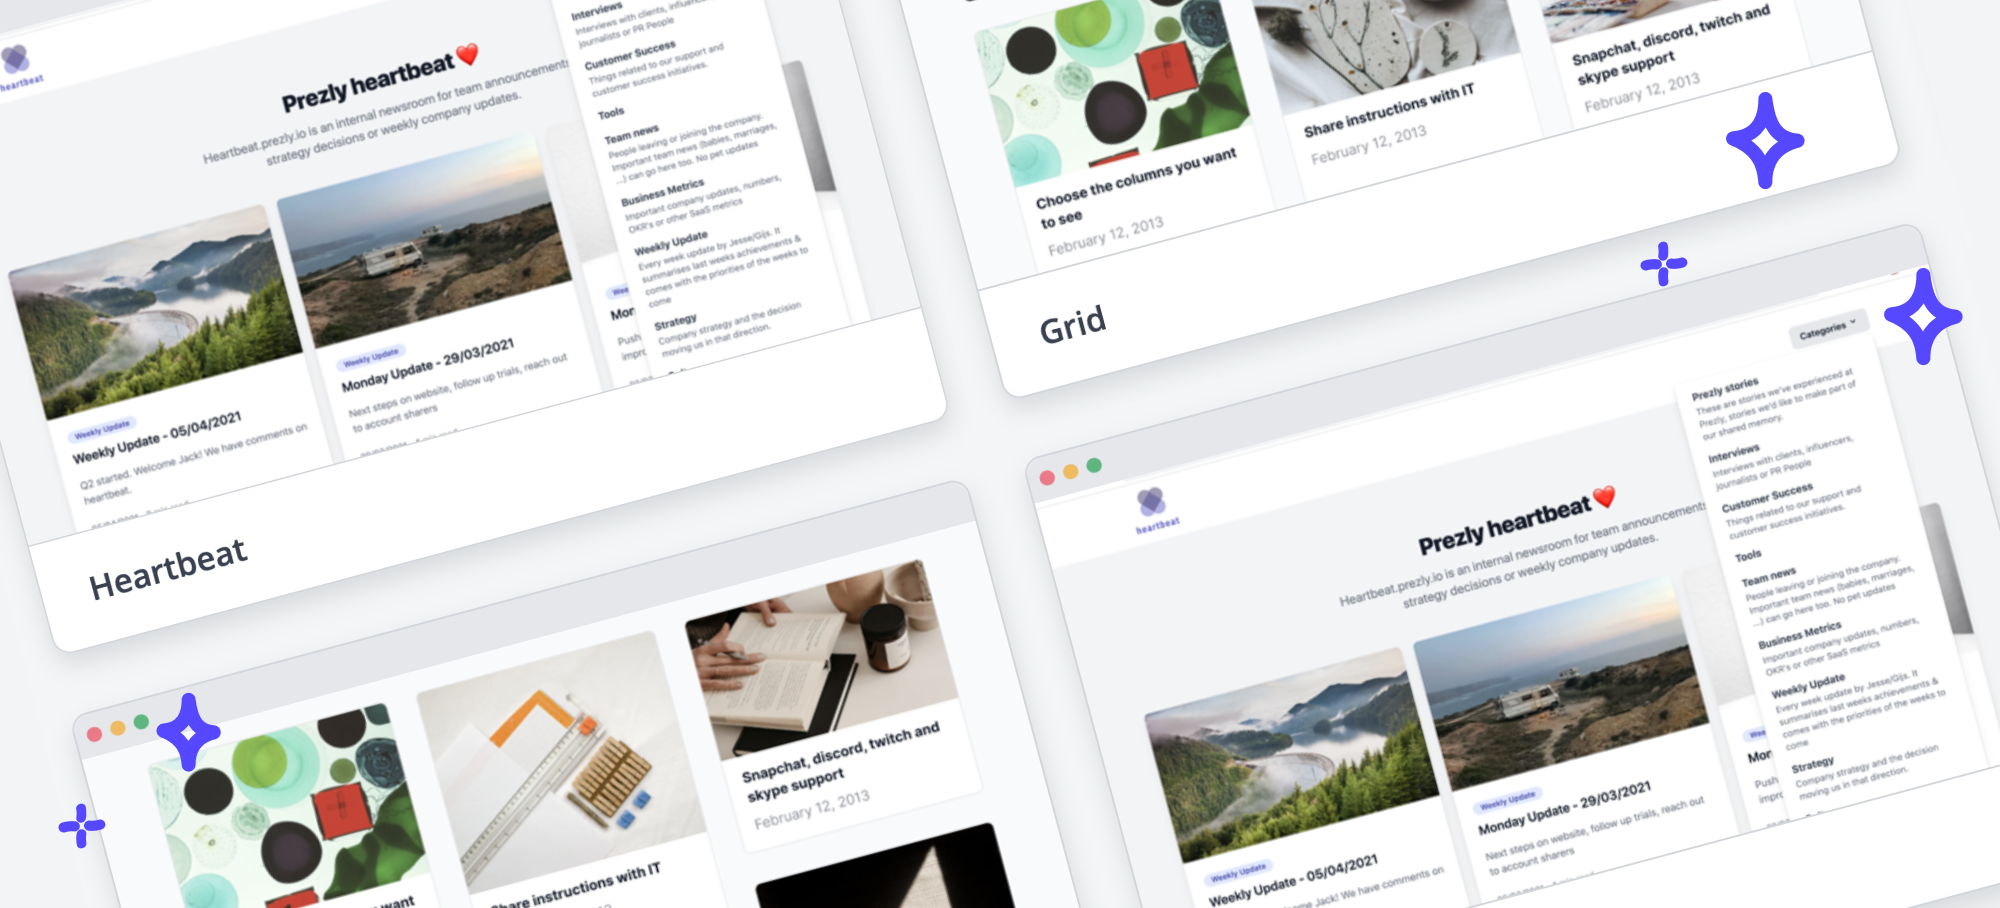 Introducing site themes, ready-made layouts for you to build on